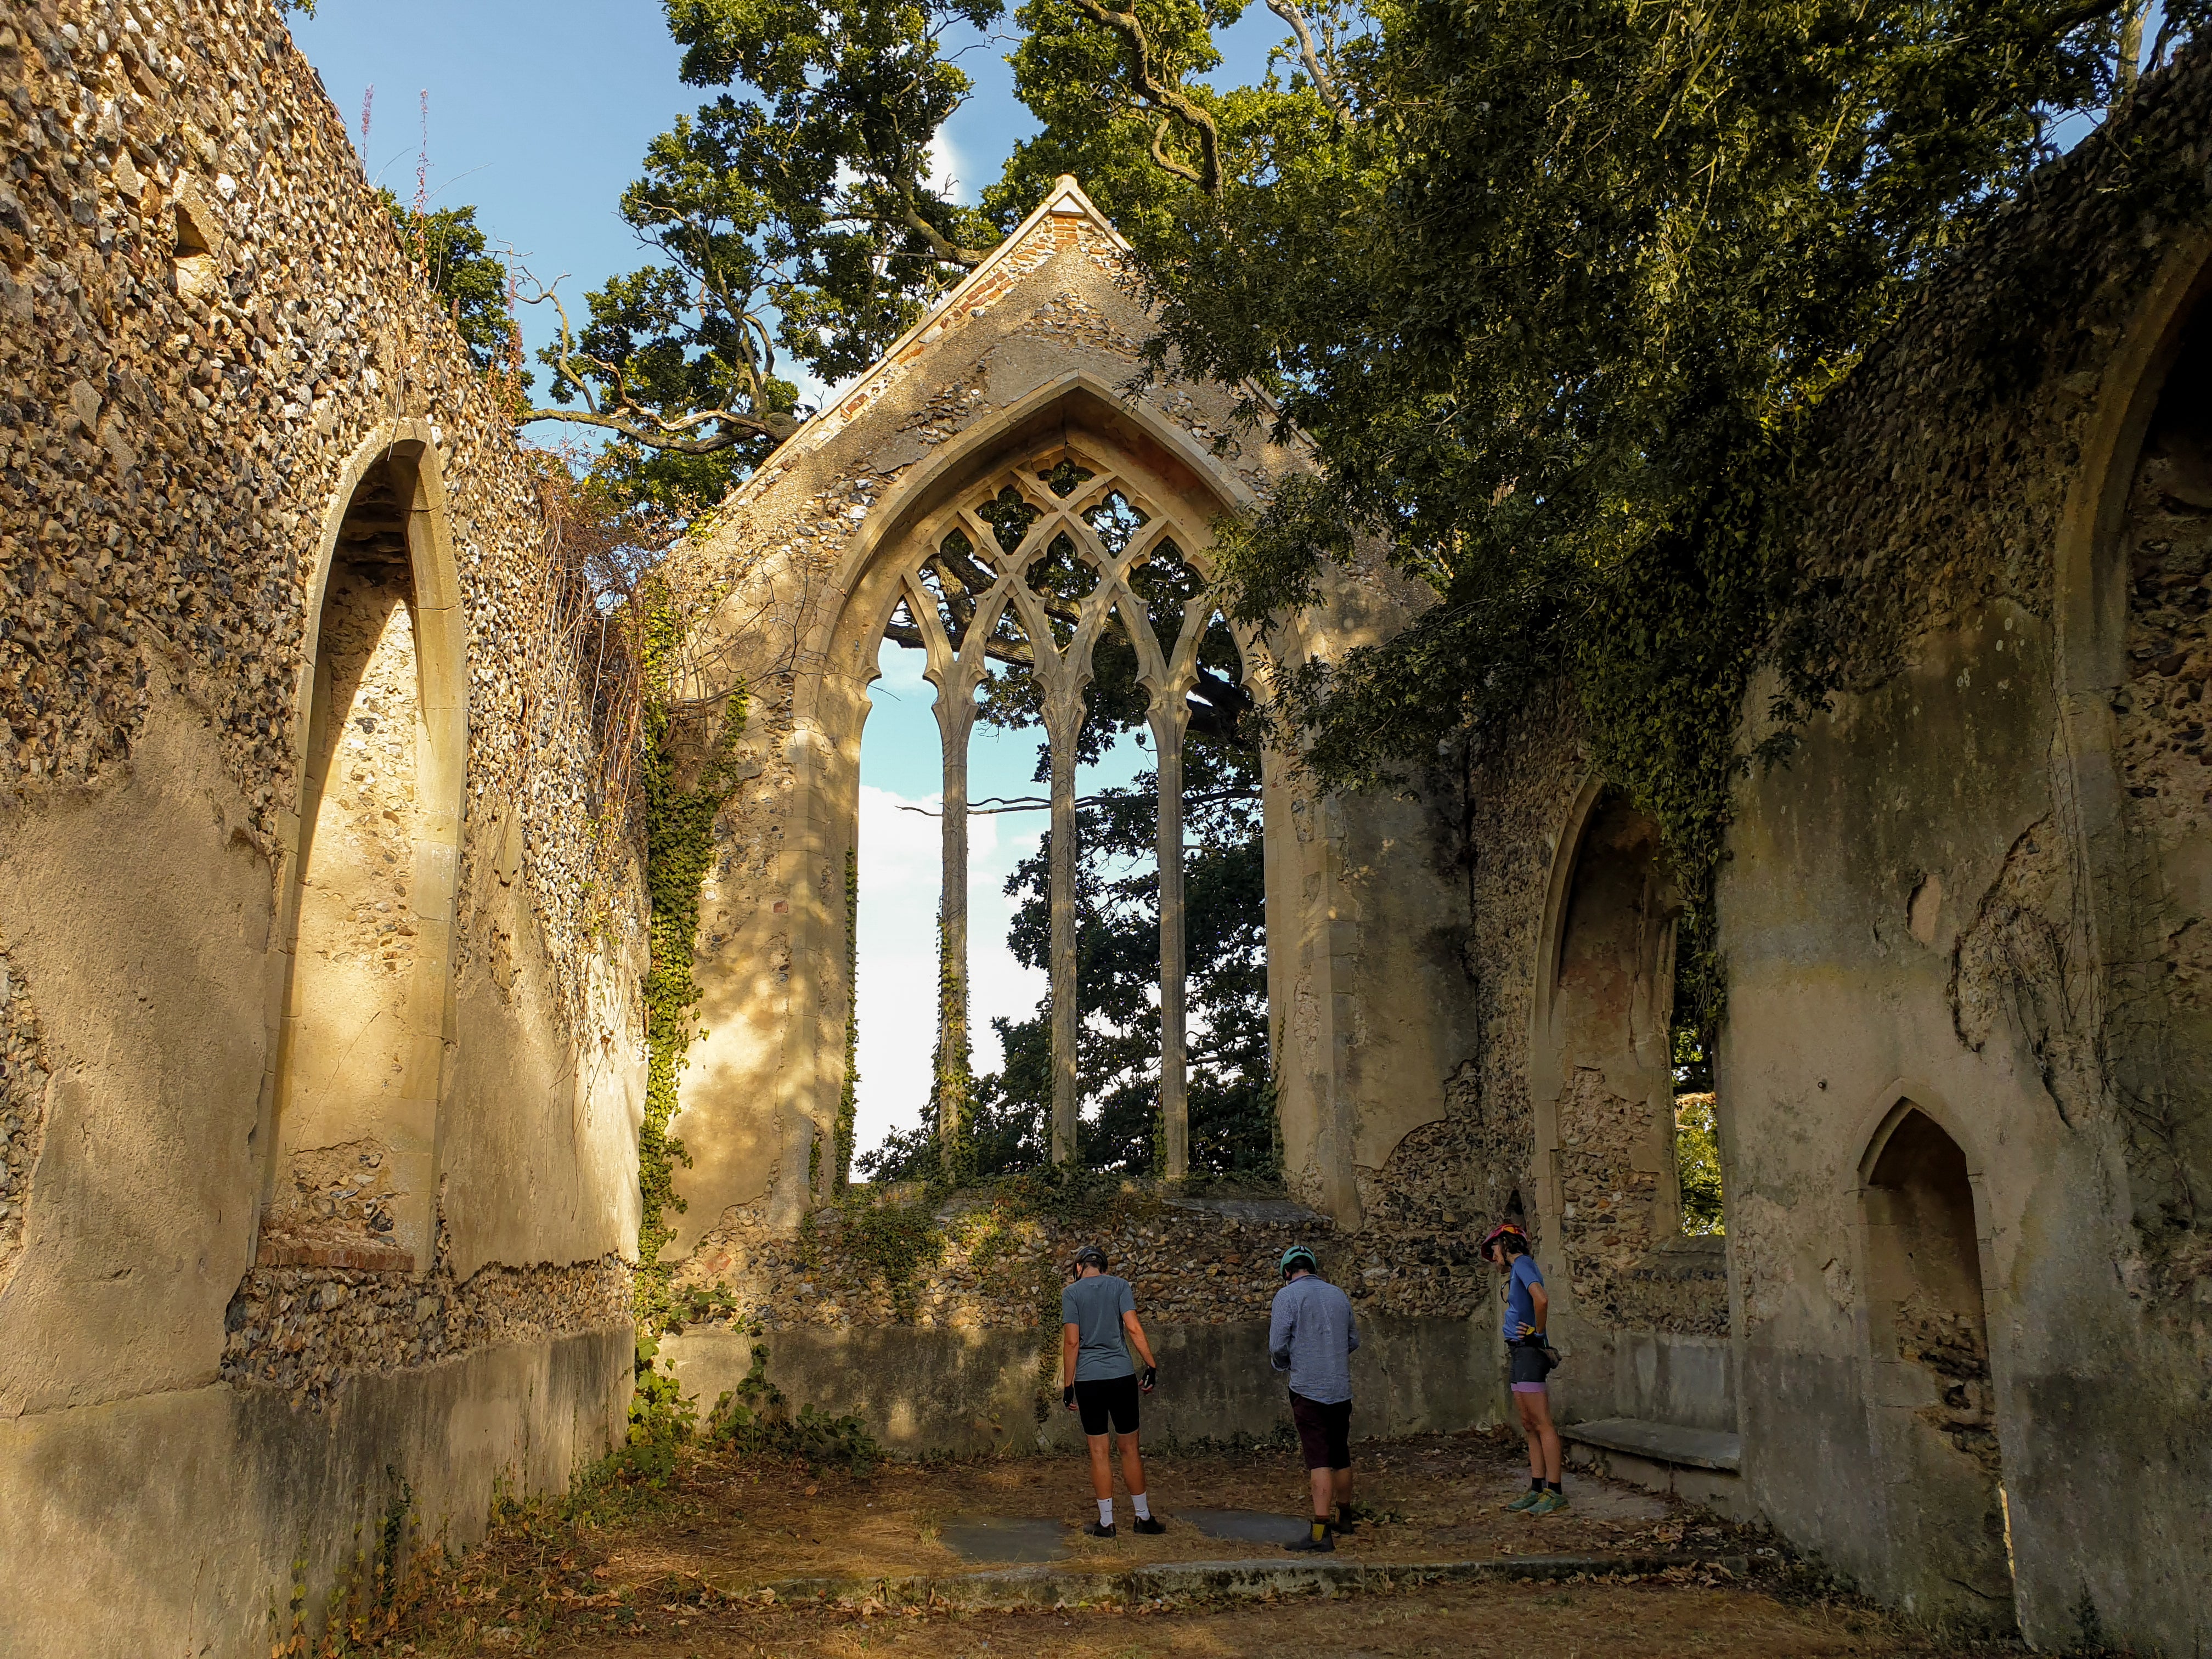 Ruins of an old church enhance the natural landscape